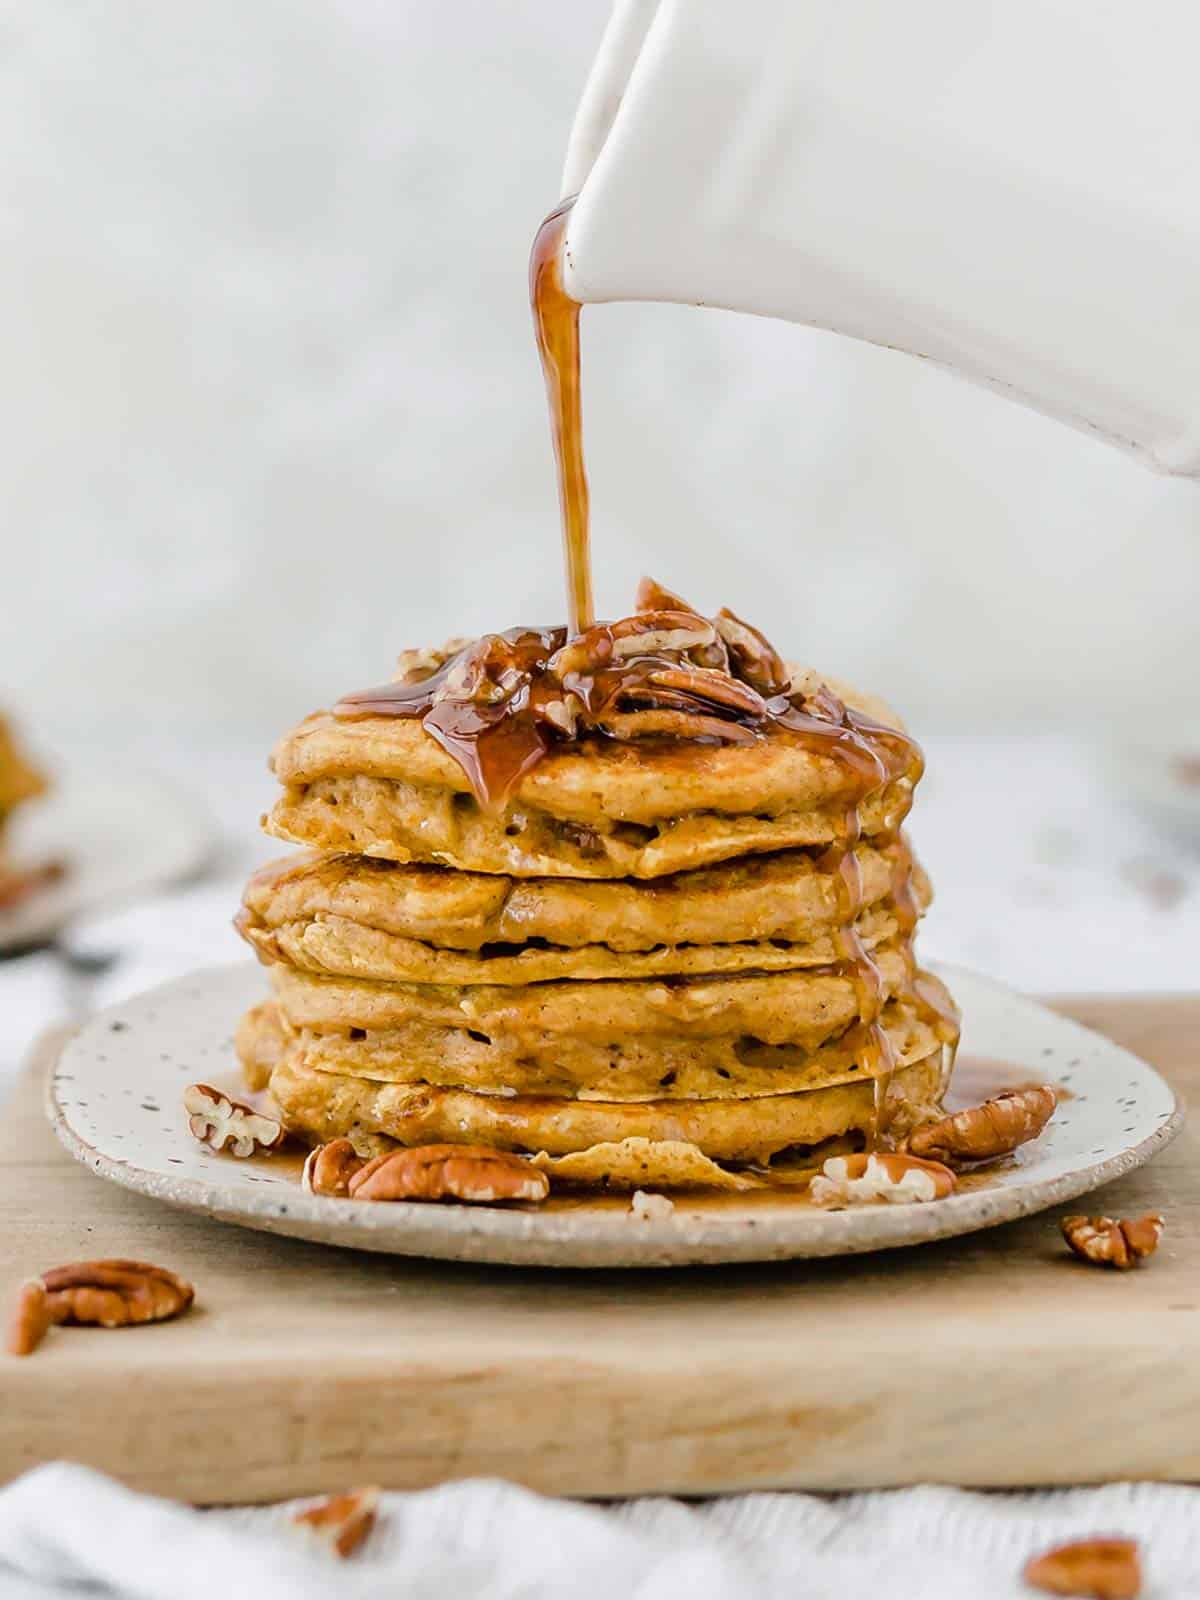 Pumpkin pancakes with pecans on top and syrup being poured over the pancake stack.